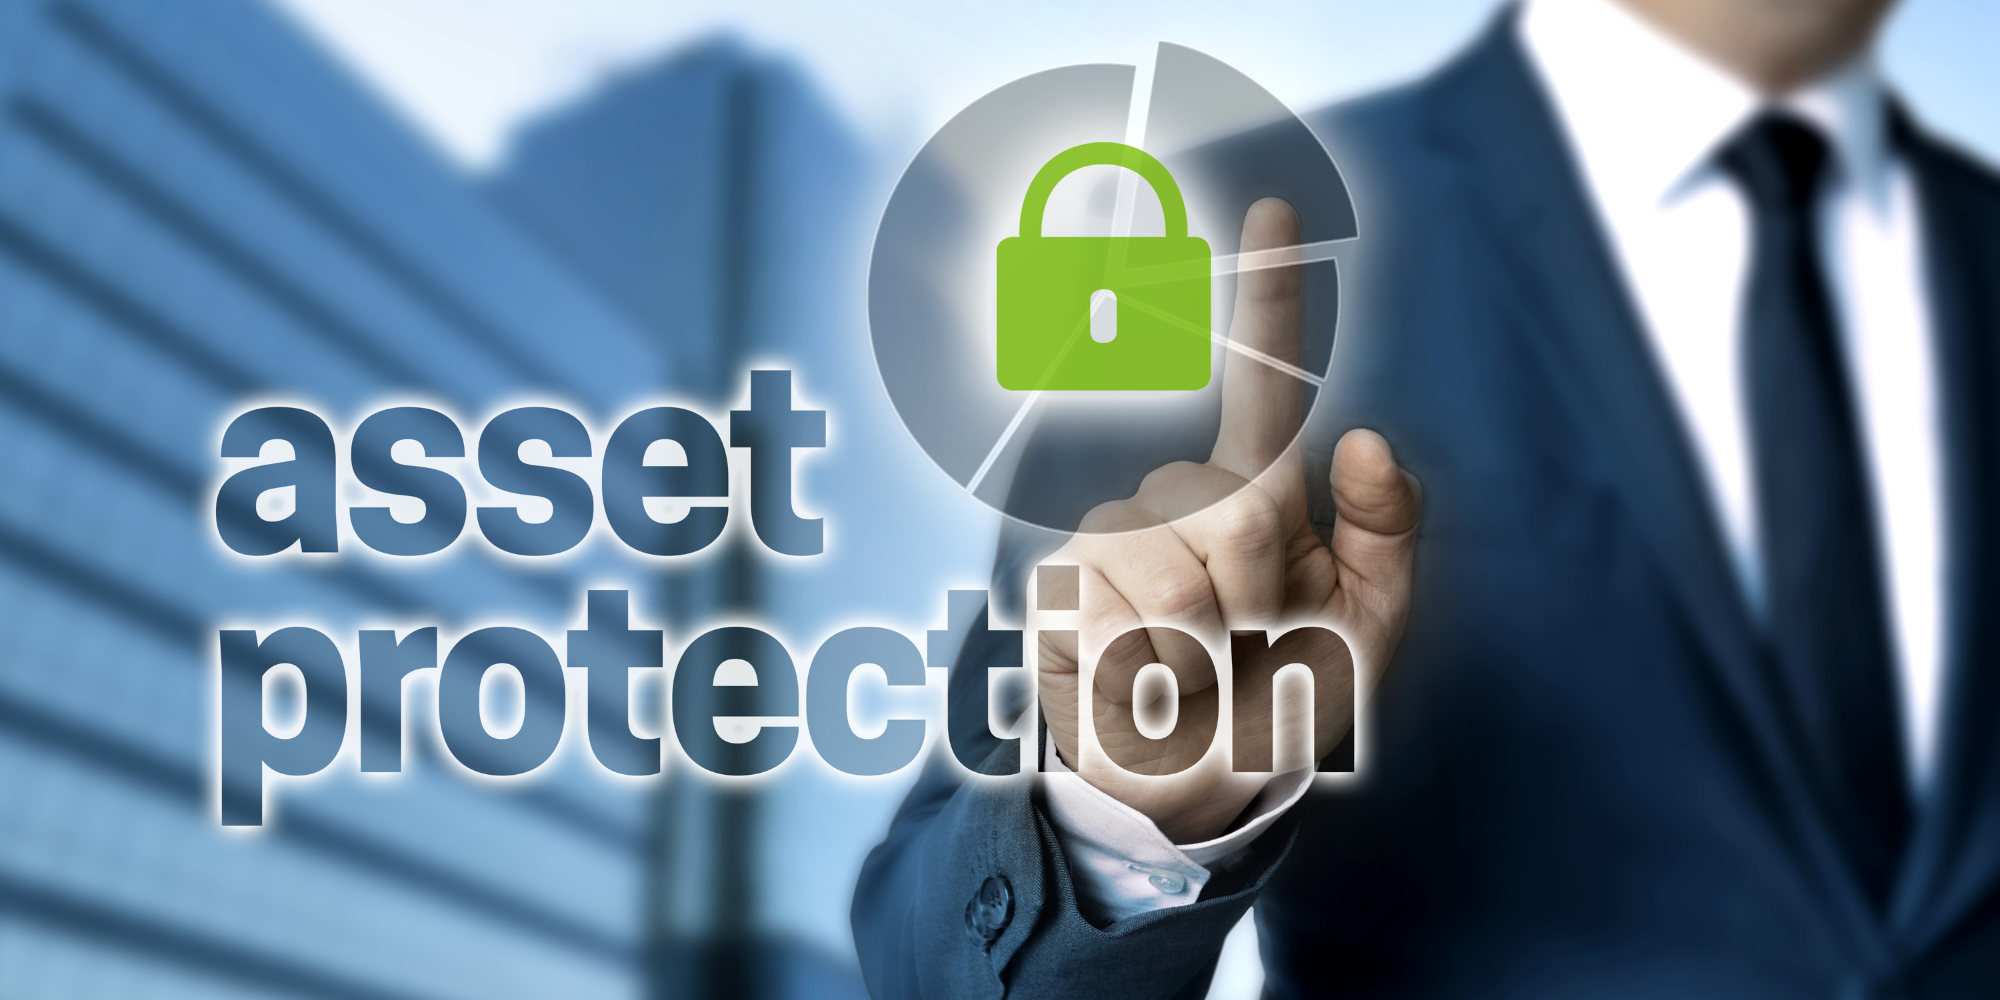 Creditor asset protection